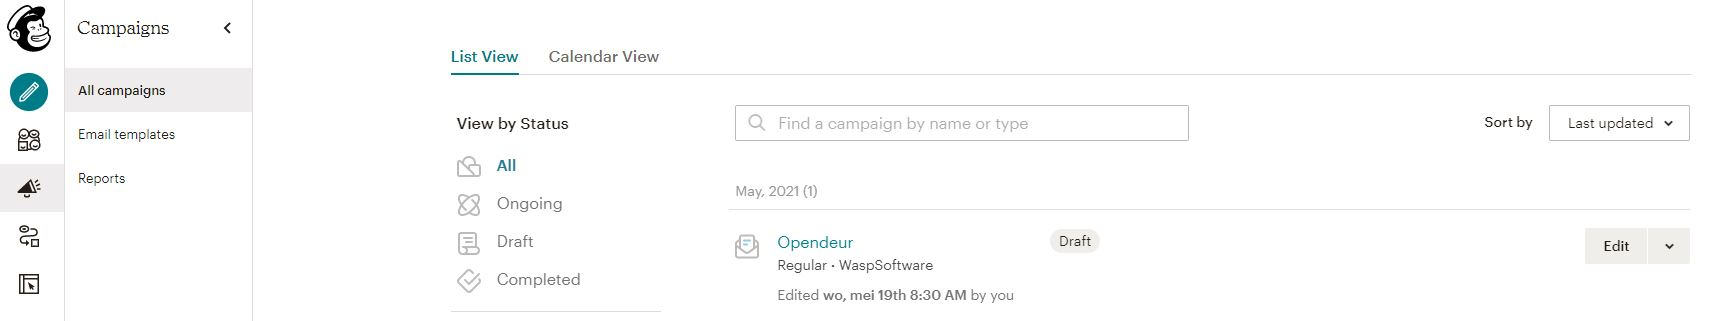 Set up and Manage your own Mailchimp campaigns